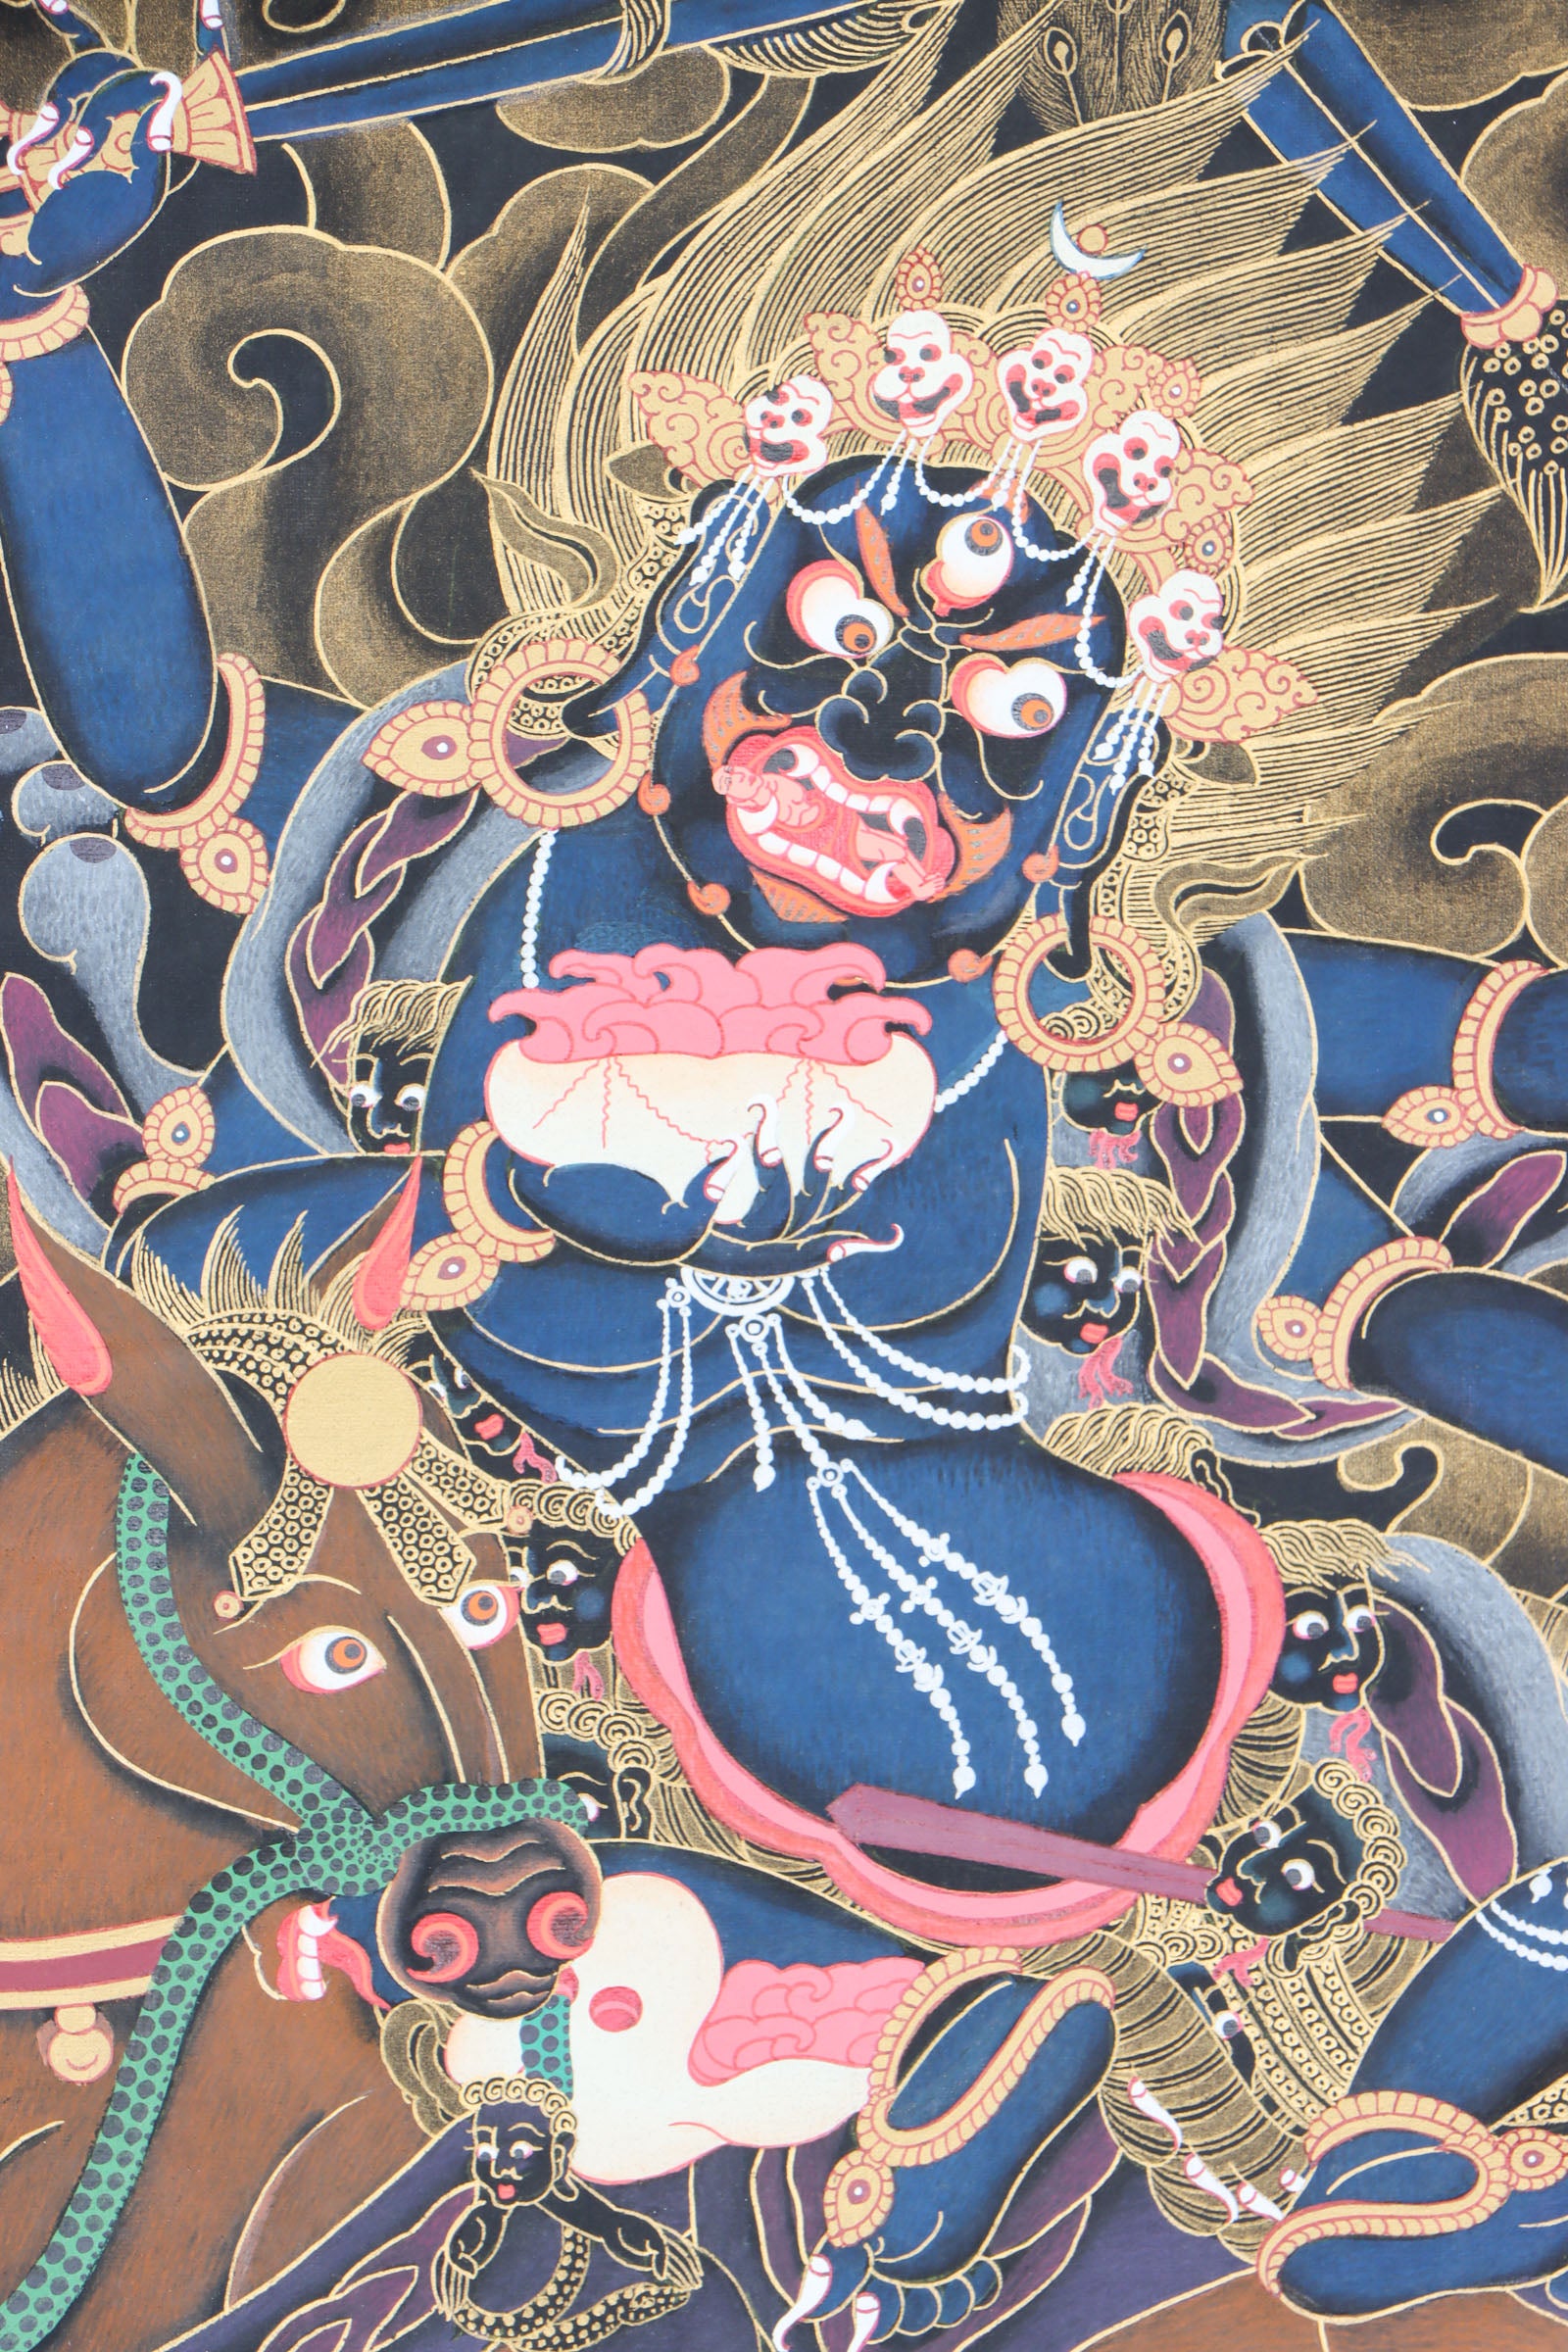 Palden Lhamo Thangka Painting for meditation, devotion, and protection.